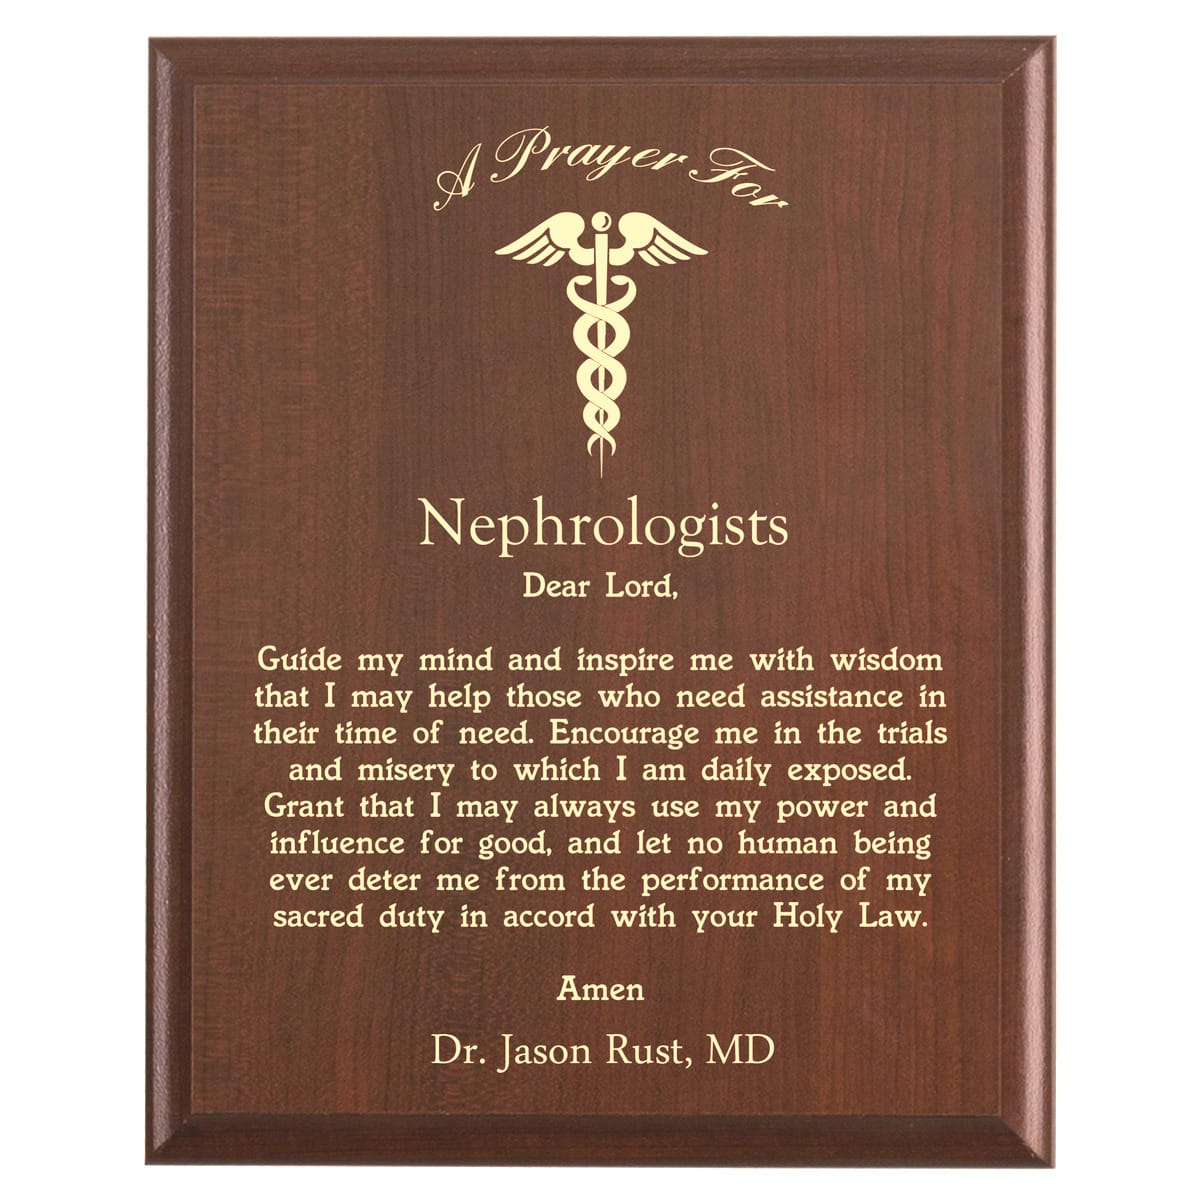 Plaque photo: Nephrologist Prayer Plaque design with free personalization. Wood style finish with customized text.